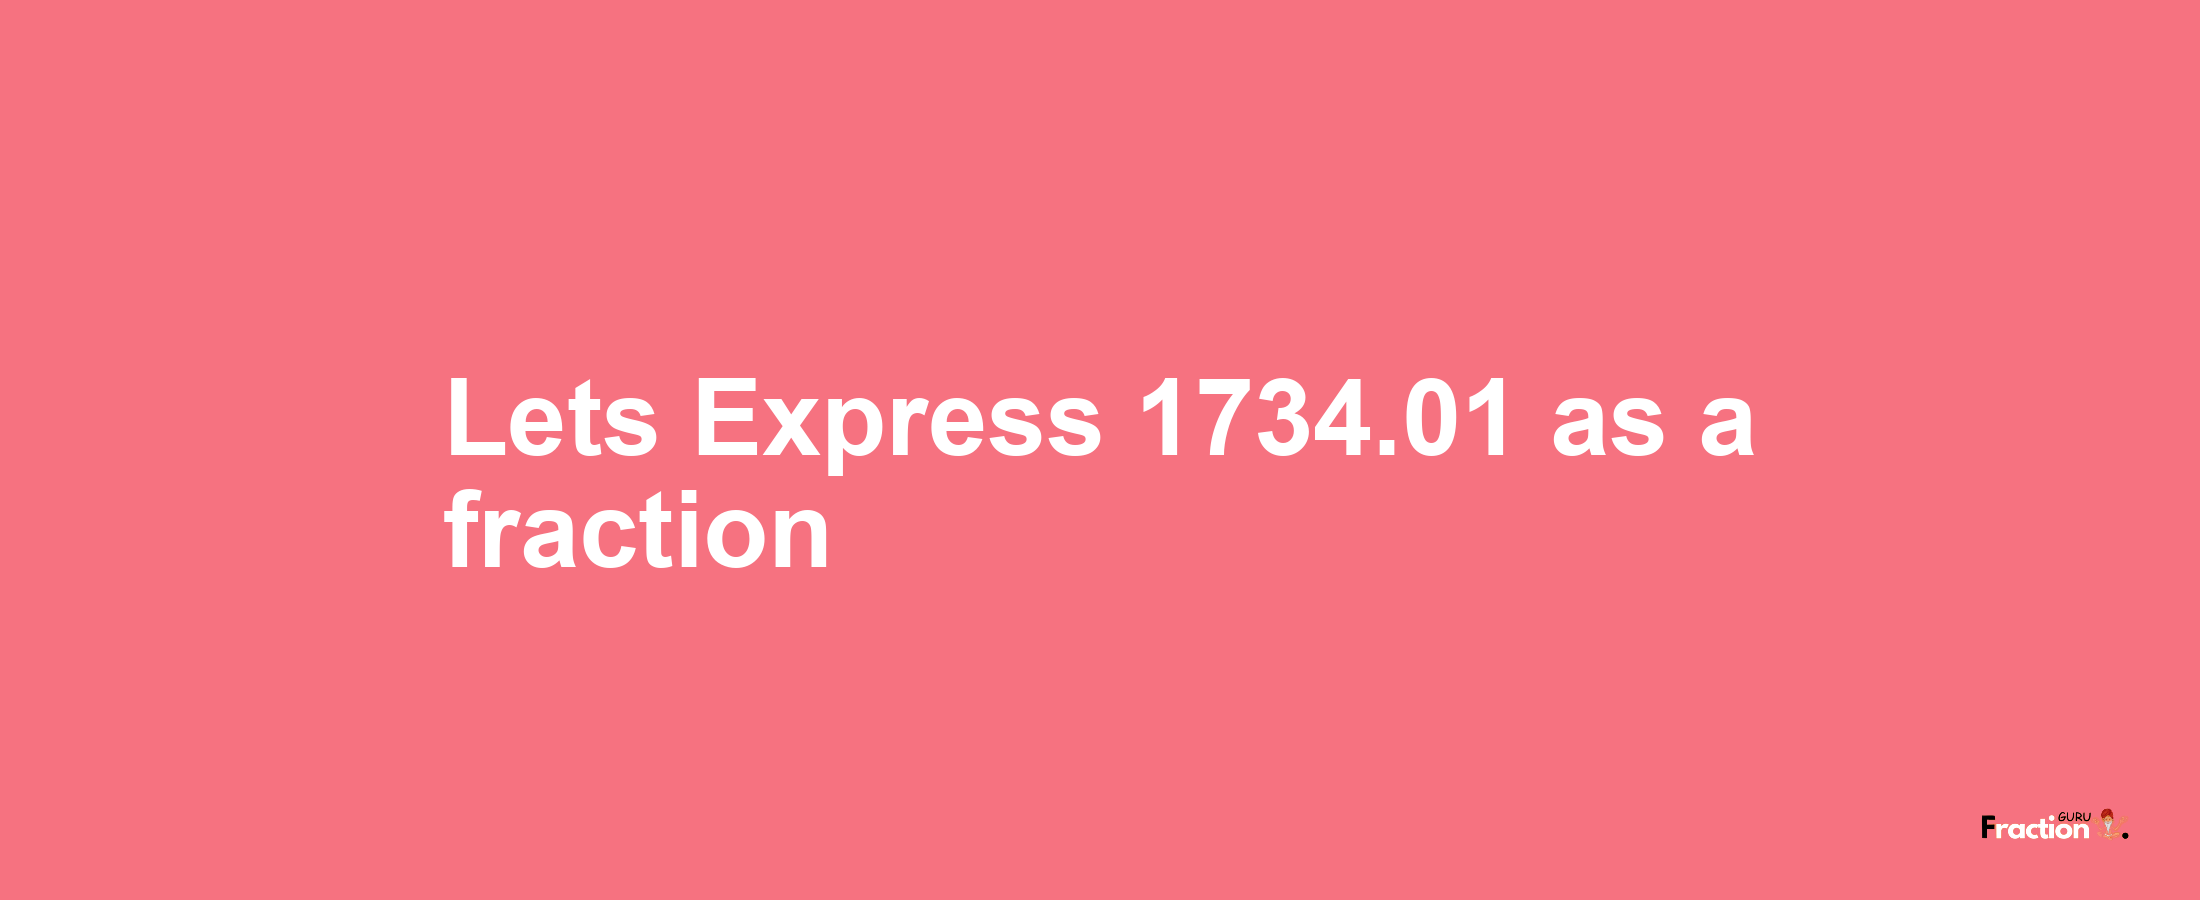 Lets Express 1734.01 as afraction